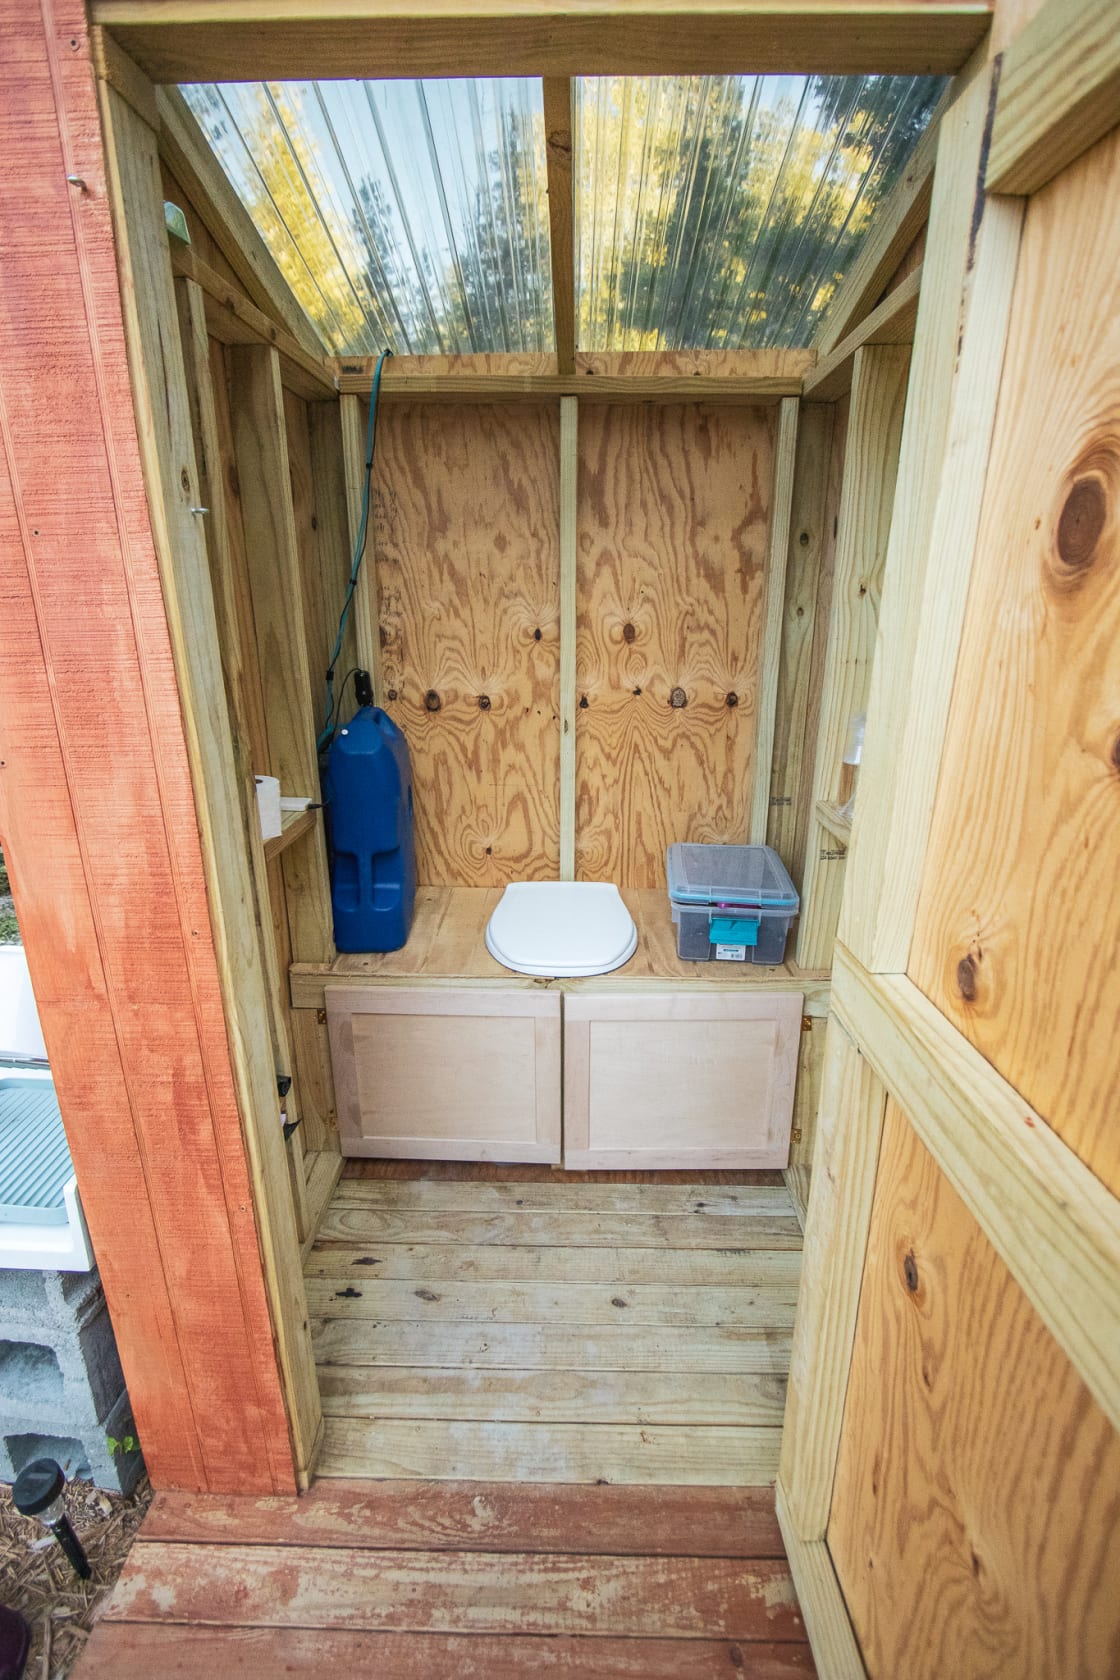 Inside the outhouse that has a composting toilet